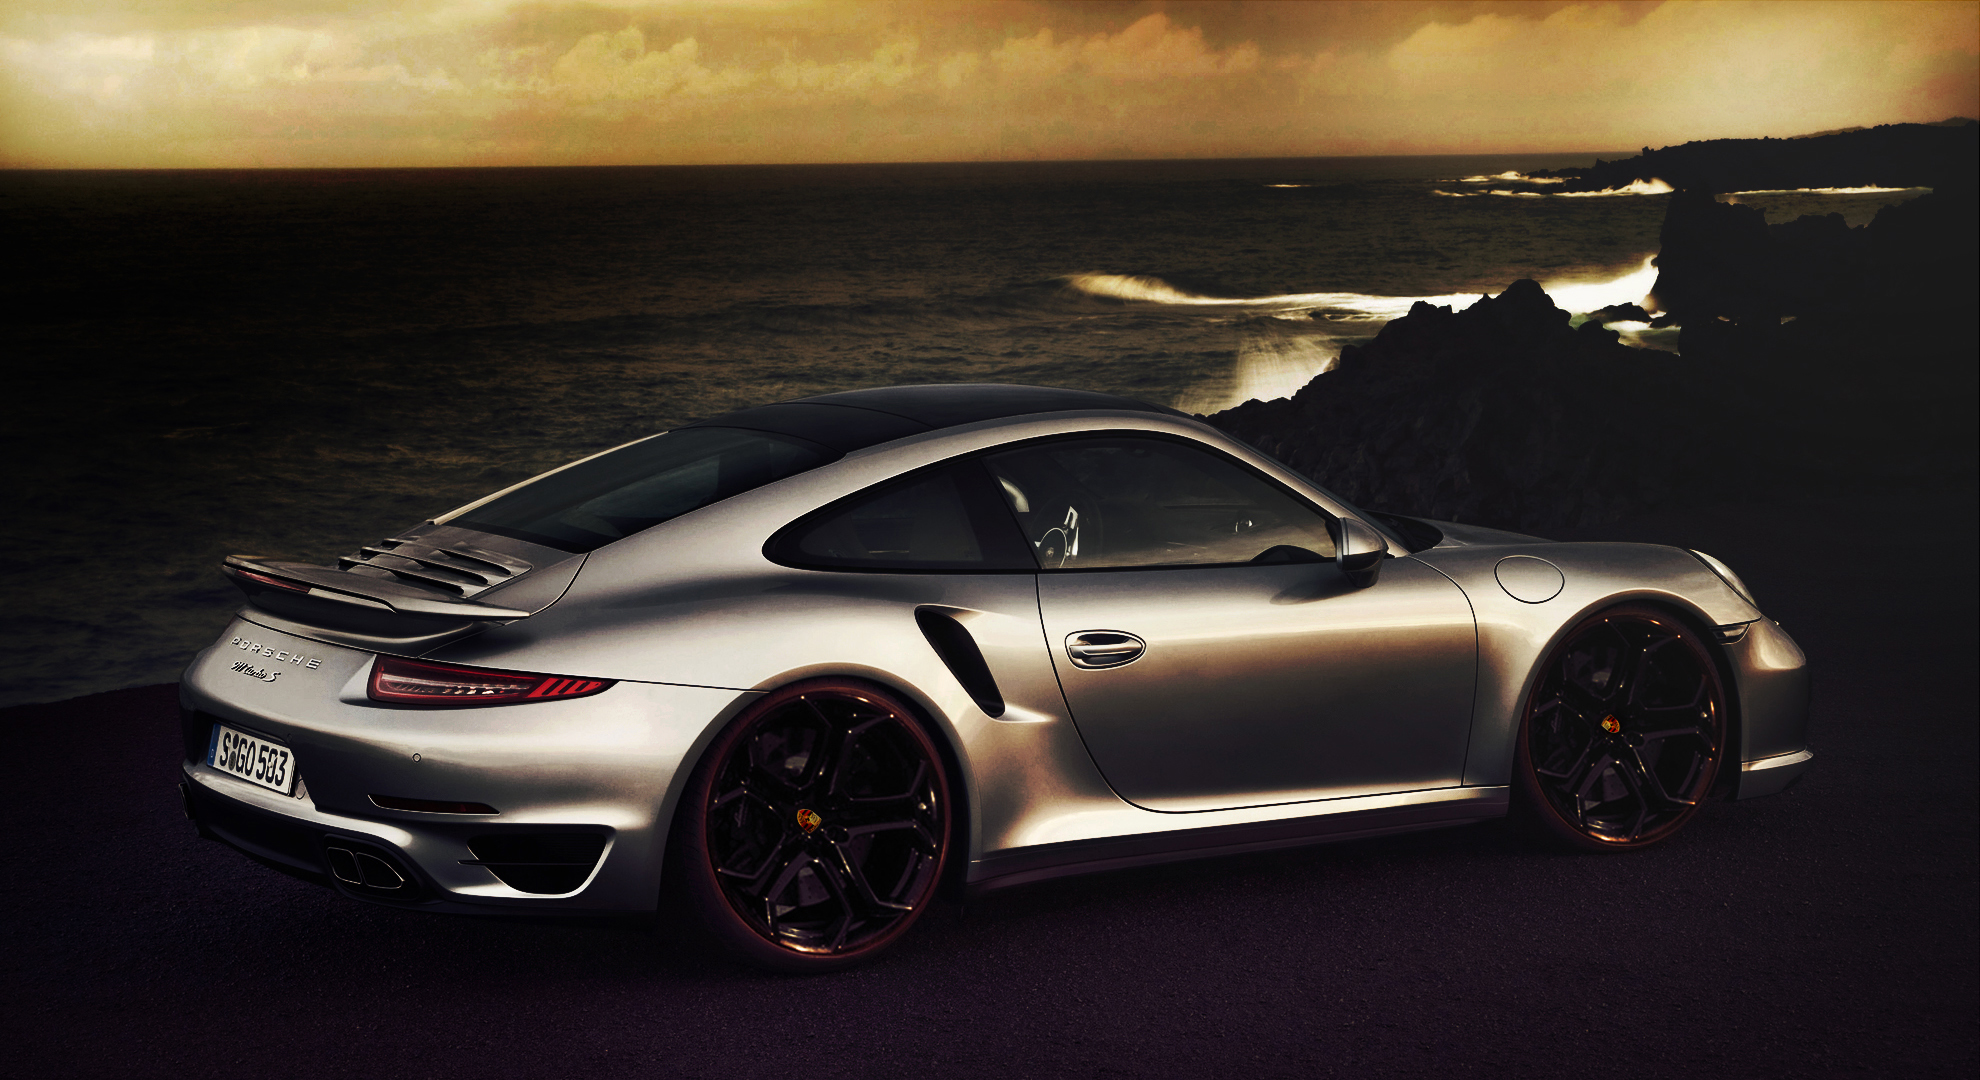 Download wallpaper 950x1534 porsche 911 turbo s front view iphone  950x1534 hd background 24324